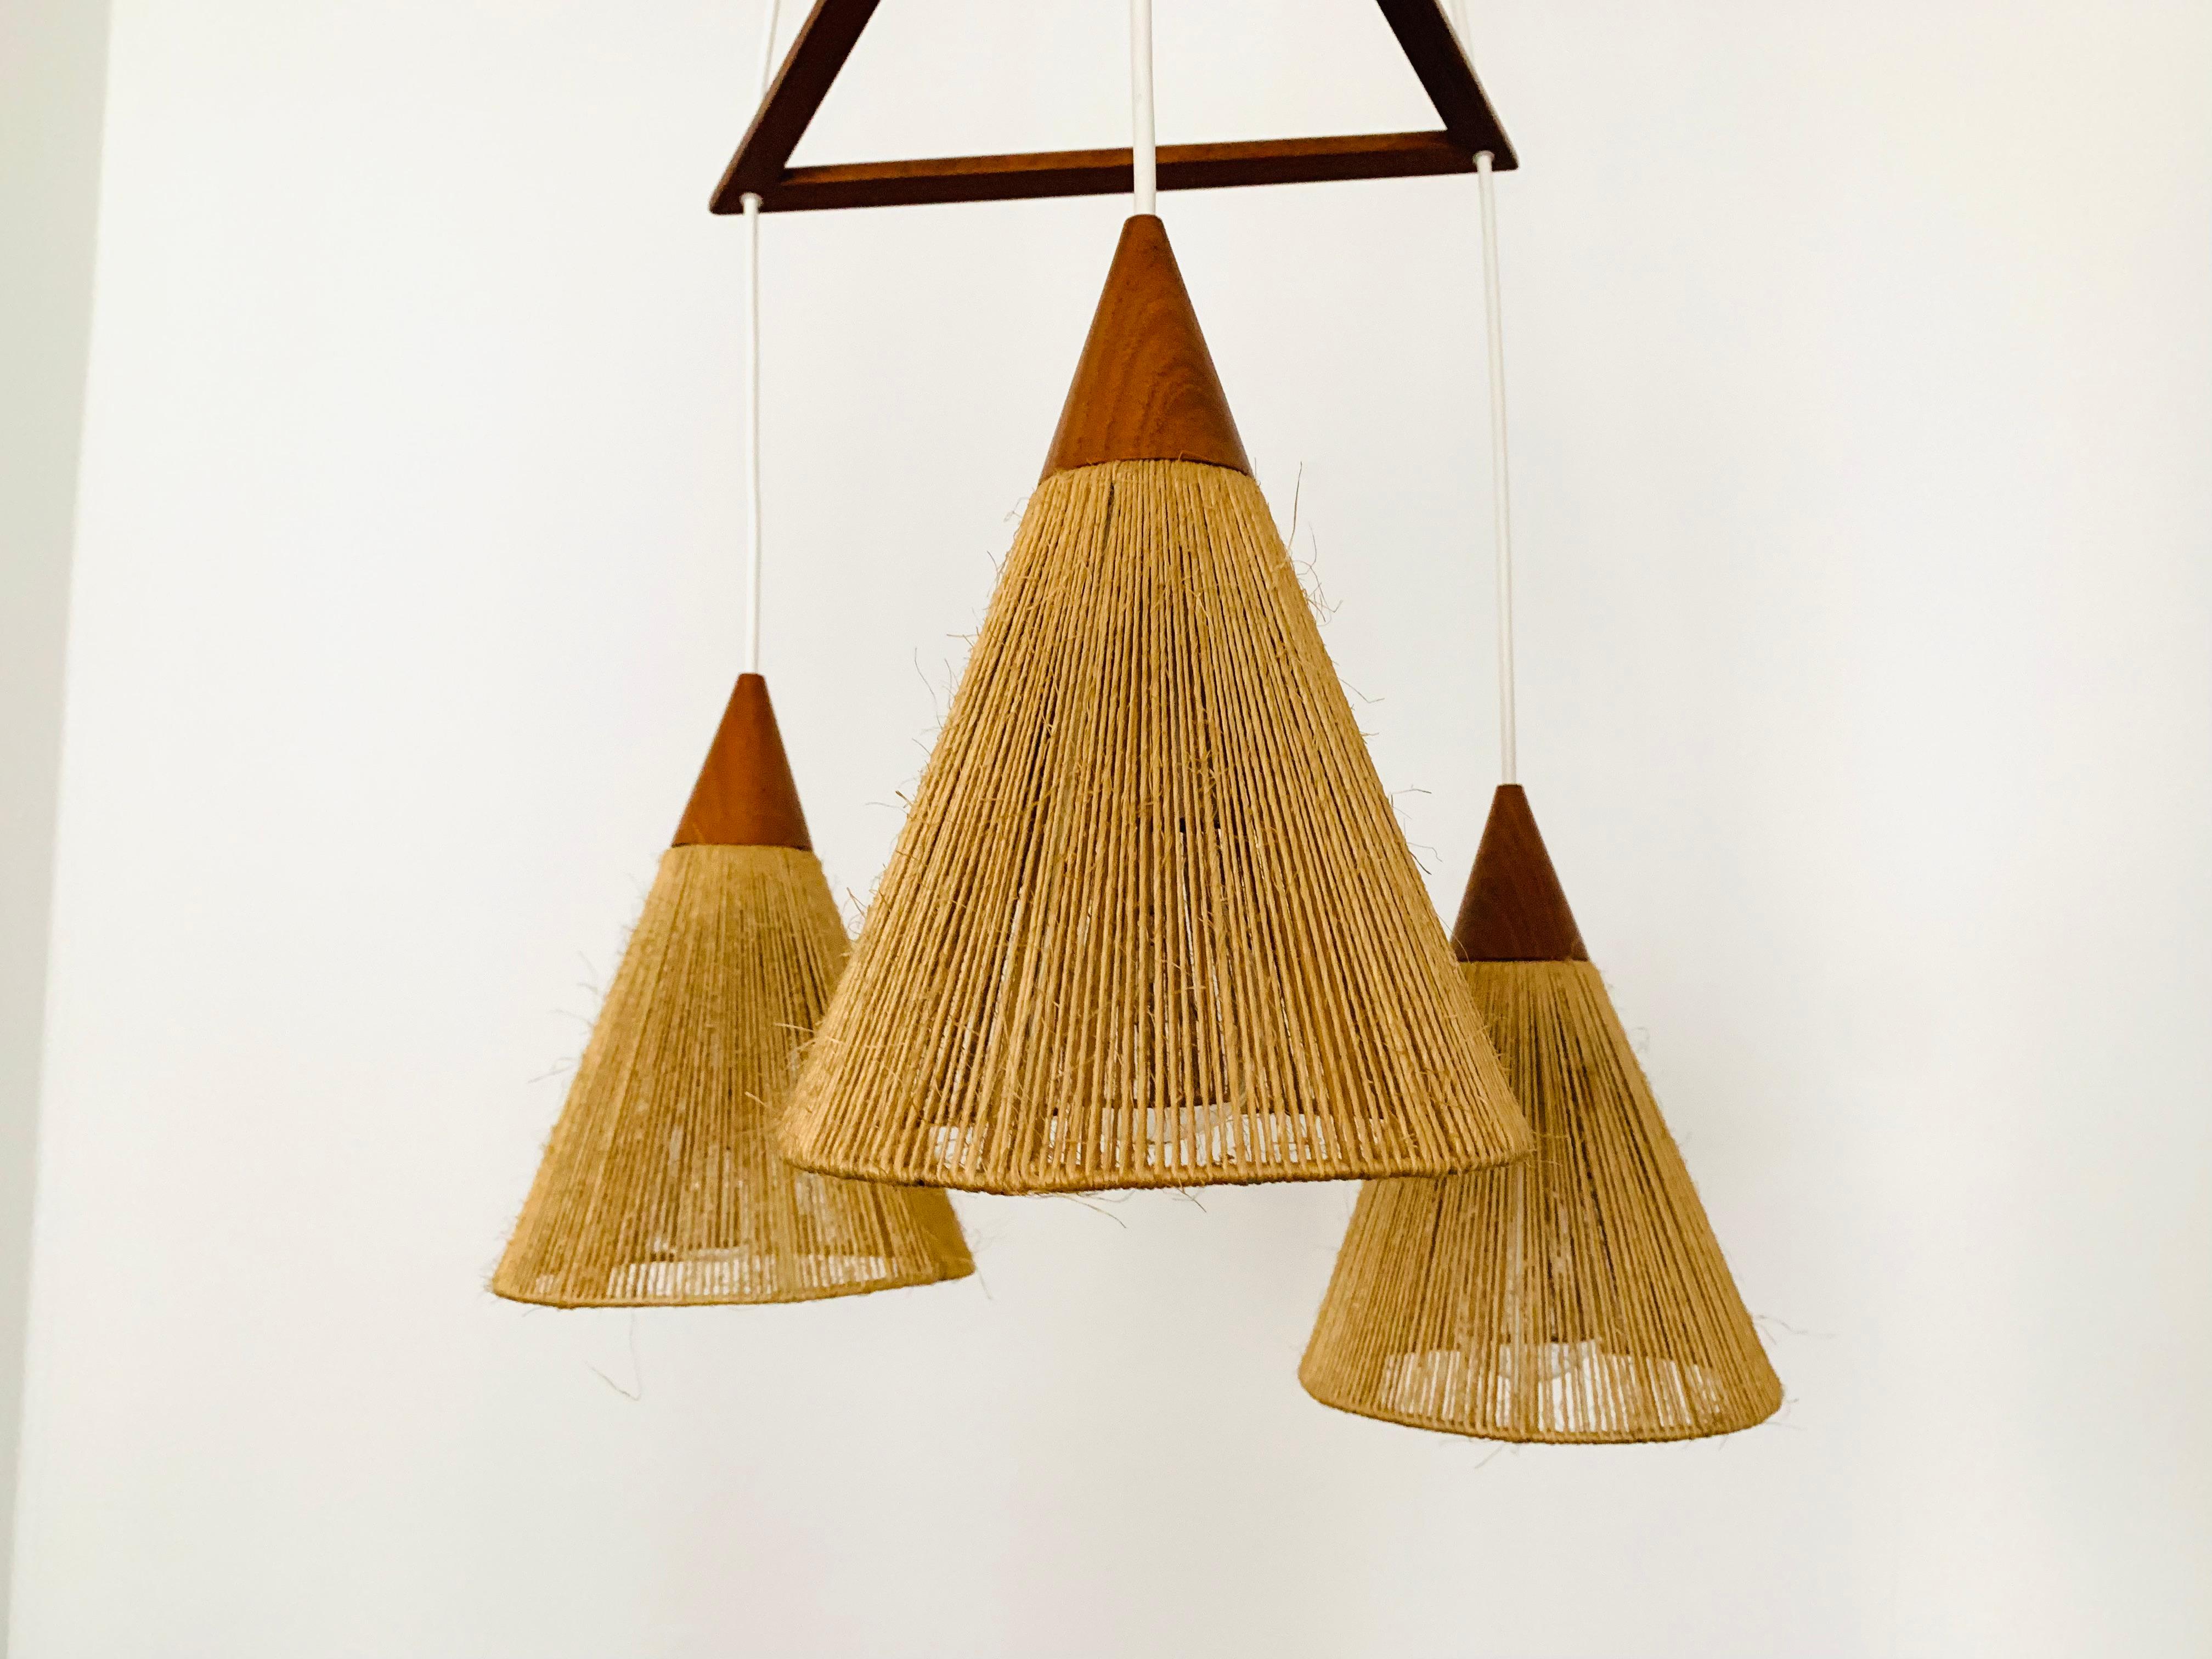 Teakwood and raffia bast cascading lamp by Temde In Good Condition For Sale In München, DE